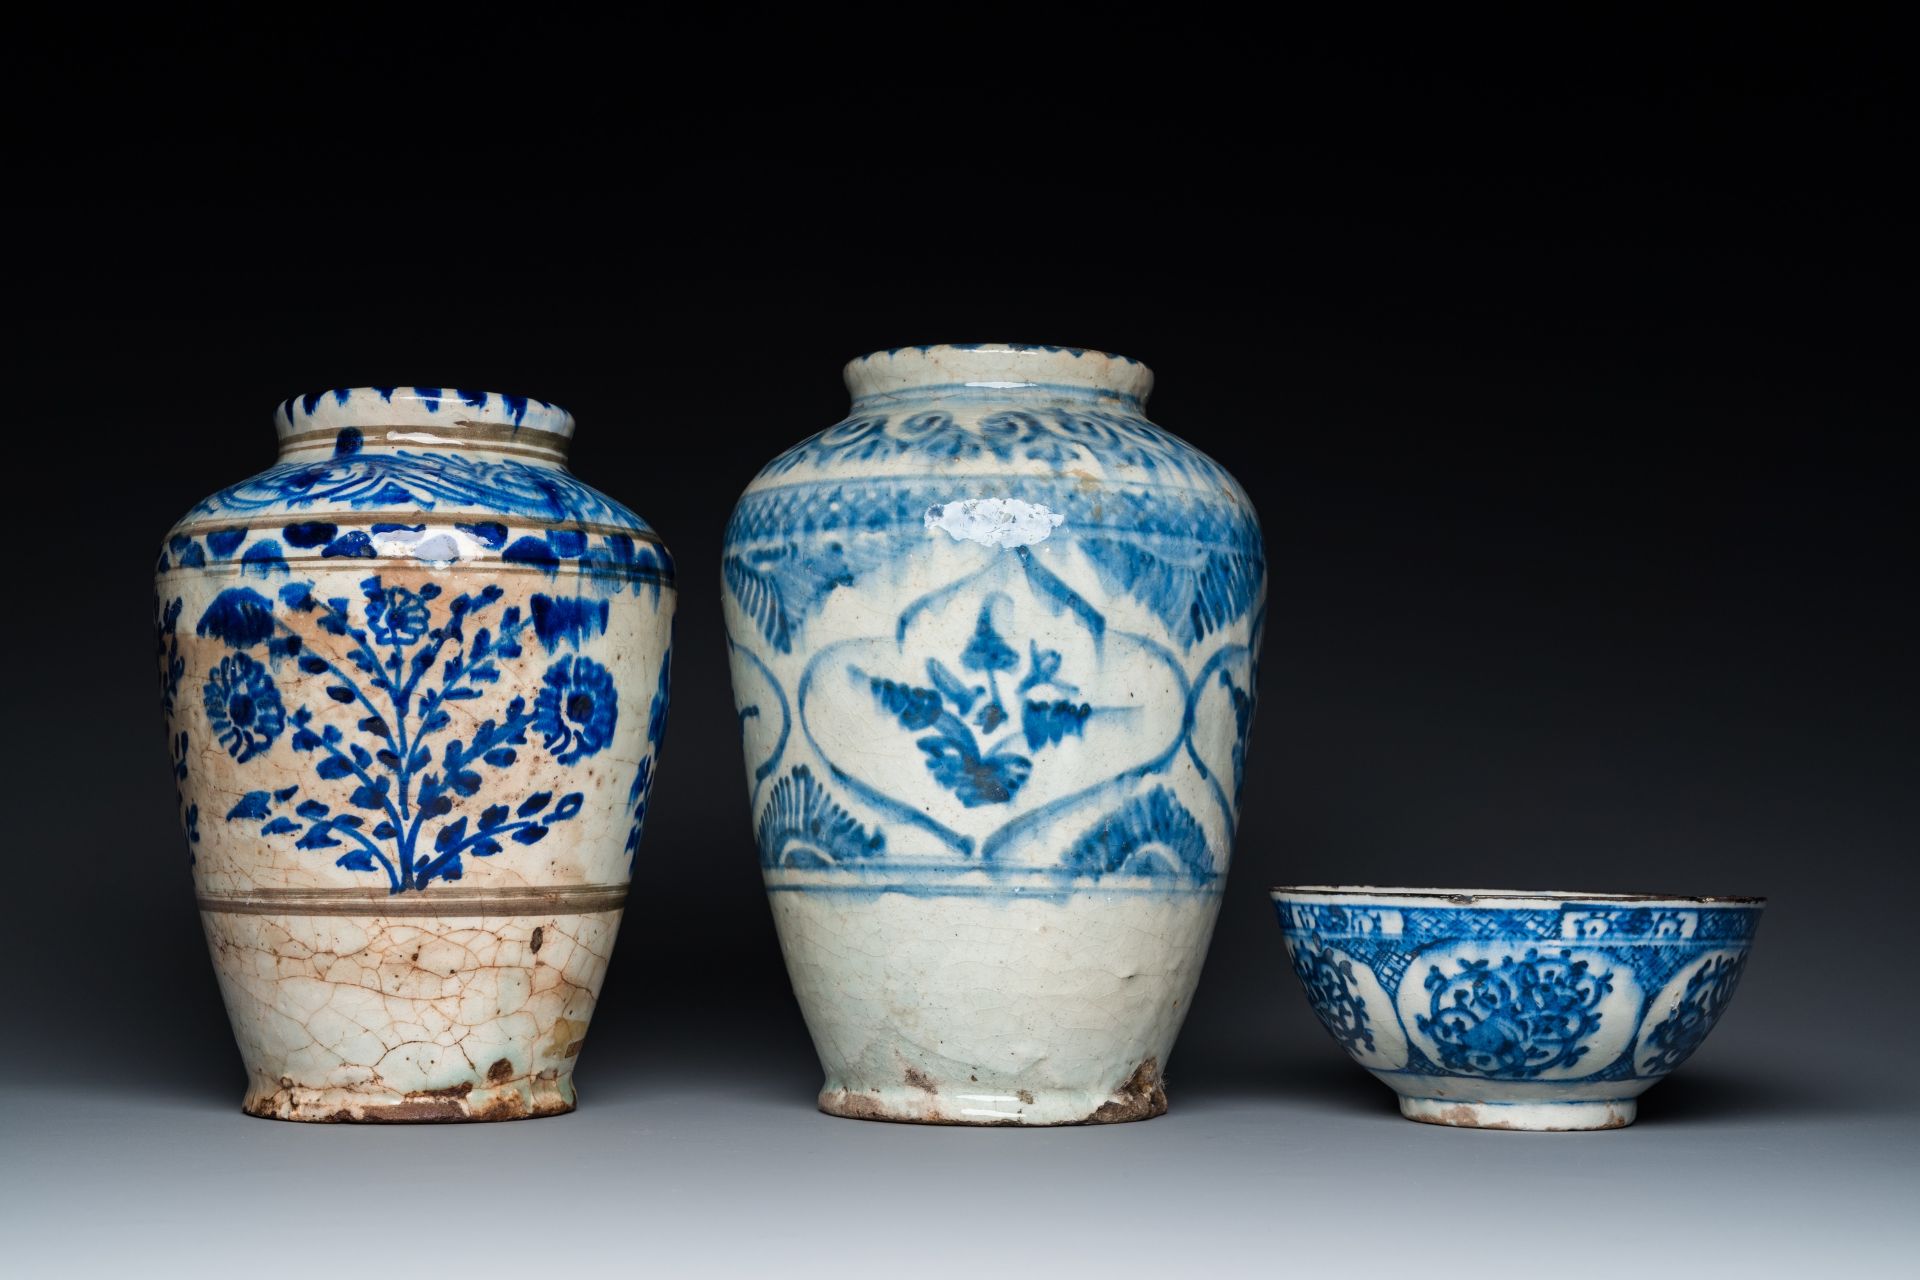 Two blue and white Islamic pottery storage jars and a bowl, Persia, 17/19th C. - Image 4 of 7